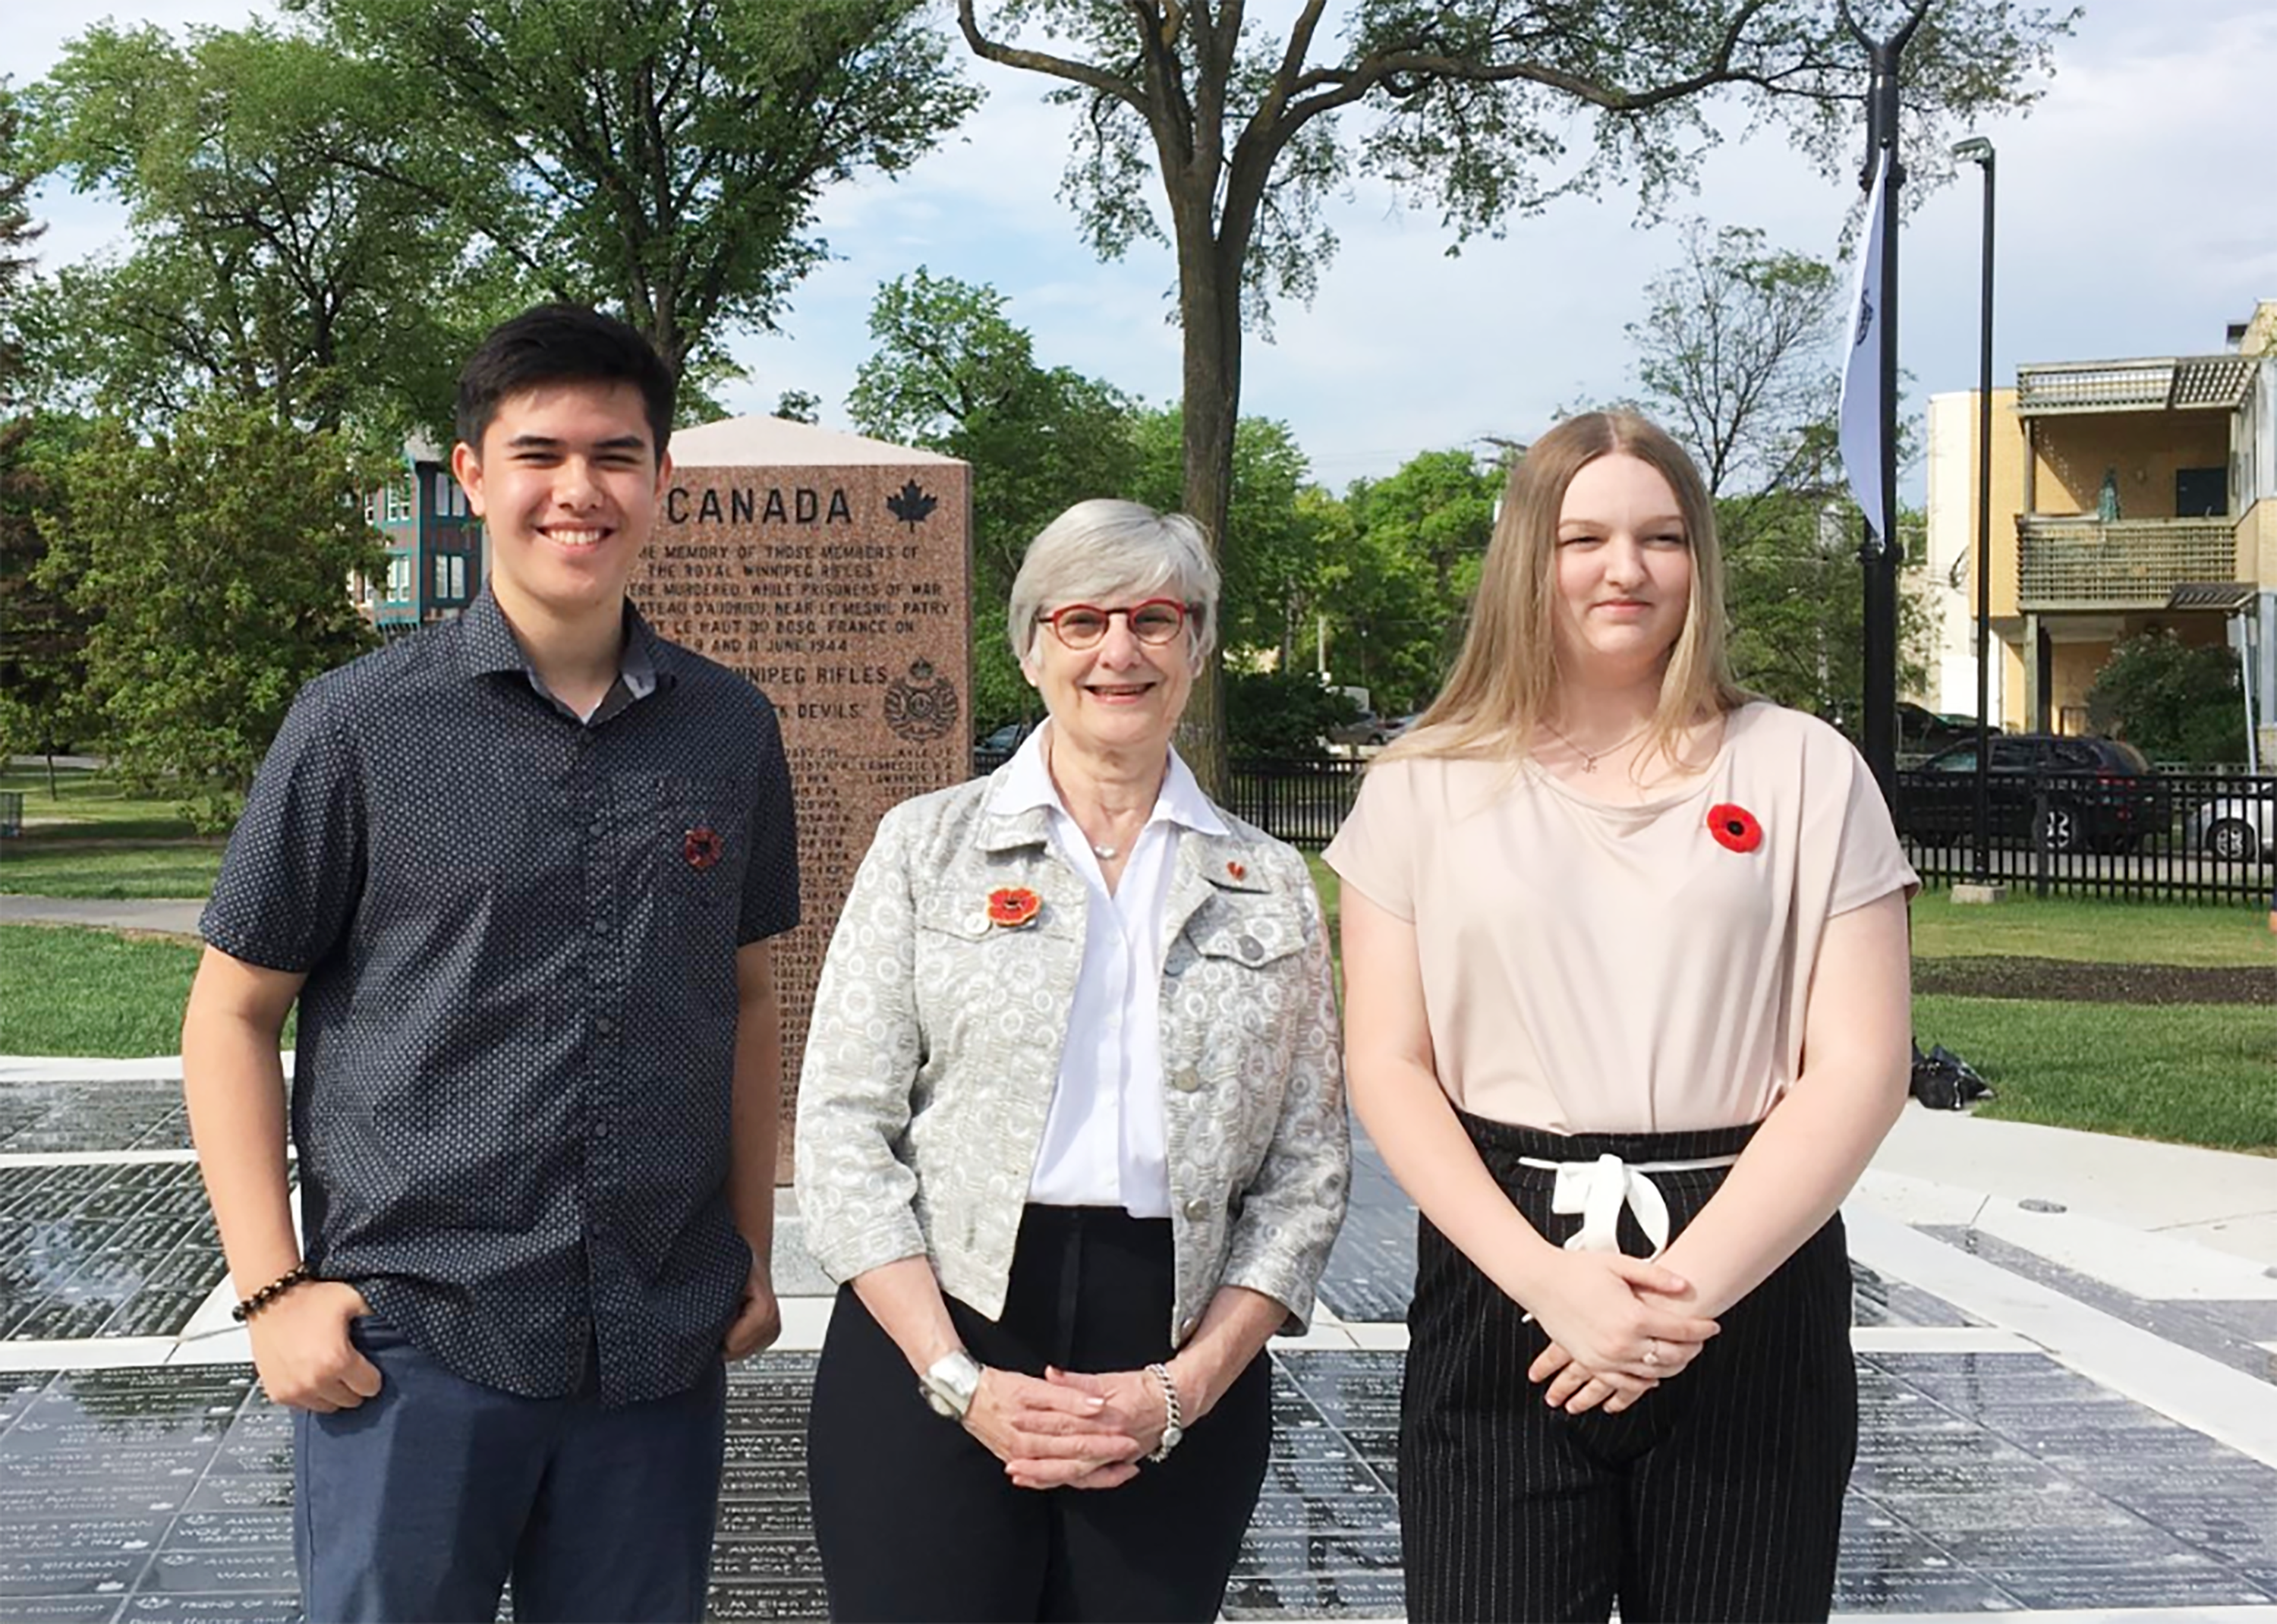 Saturday, June 8, 2019 — Senator Patricia Bovey congratulates Winnipeg students Jordan Talledo and Alyssa Mason who were selected to join 24 students to tour Canadian battlefields of the first and second world wars as part of the Juno75 Student Pilgrimage in July. This once-in-a-lifetime opportunity for high school students from across Canada is sponsored by the Juno Beach Centre and will enable participants to travel to Northern France and Belgium to gain first-hand knowledge of Canada’s participation in the first and second world wars.